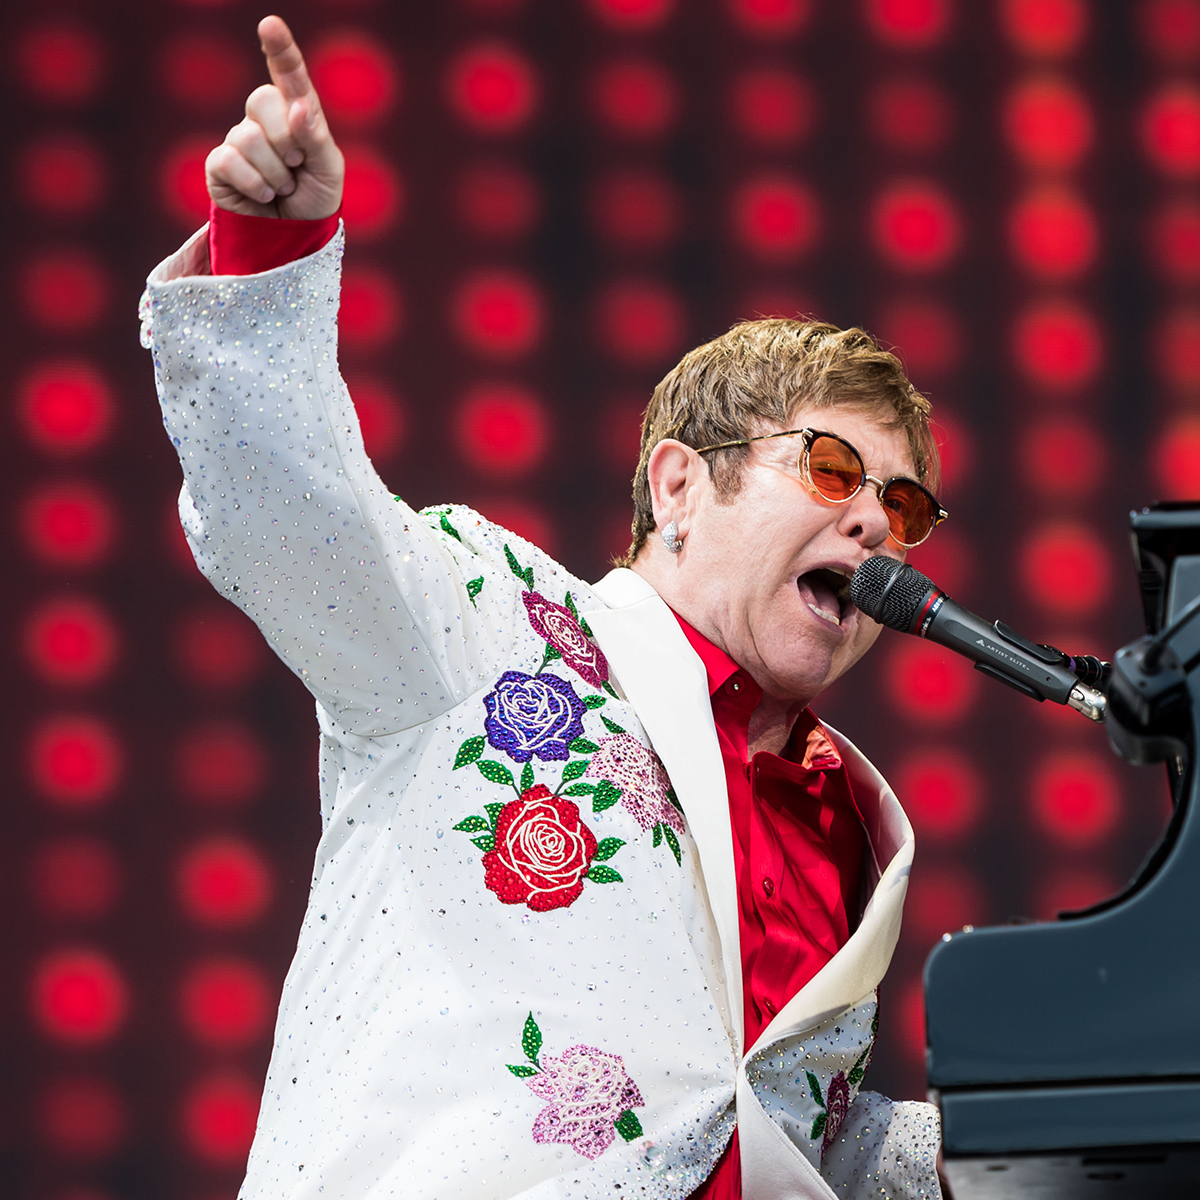 45 years after historic Dodger Stadium gig, Elton John remembers the  electricity…and his incredible outfit